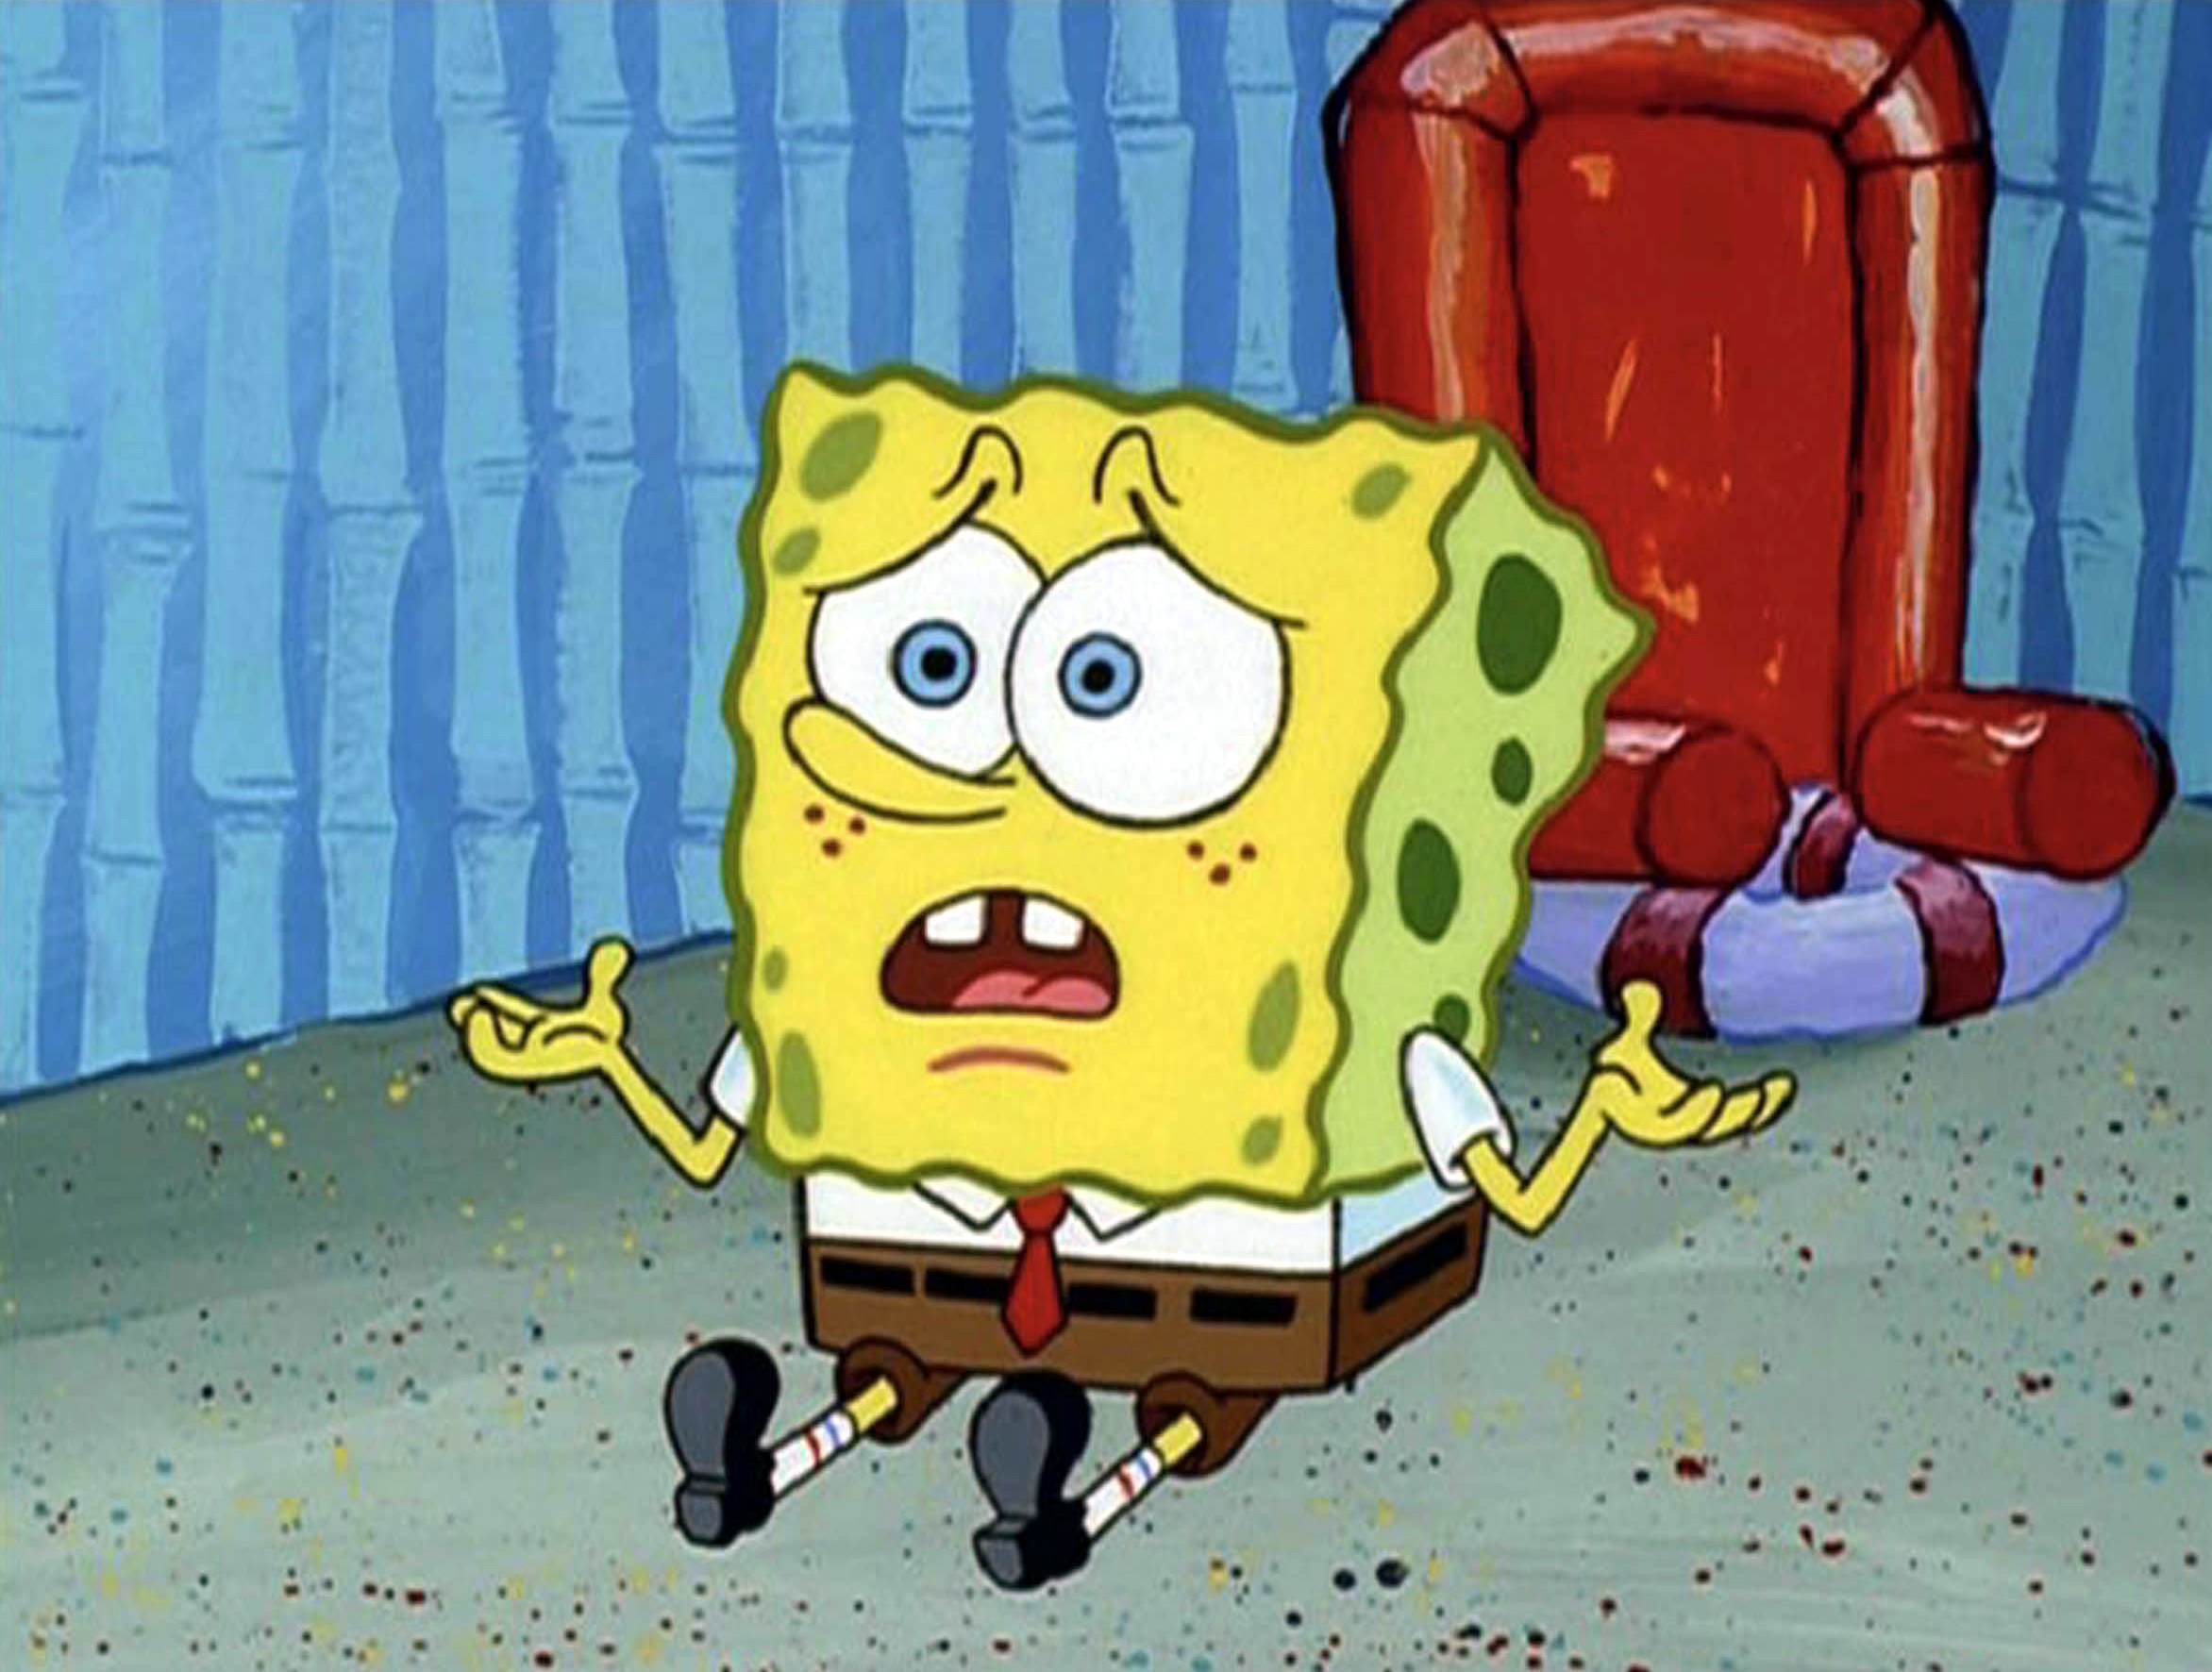 SpongeBob holding up his hands in a questioning manner